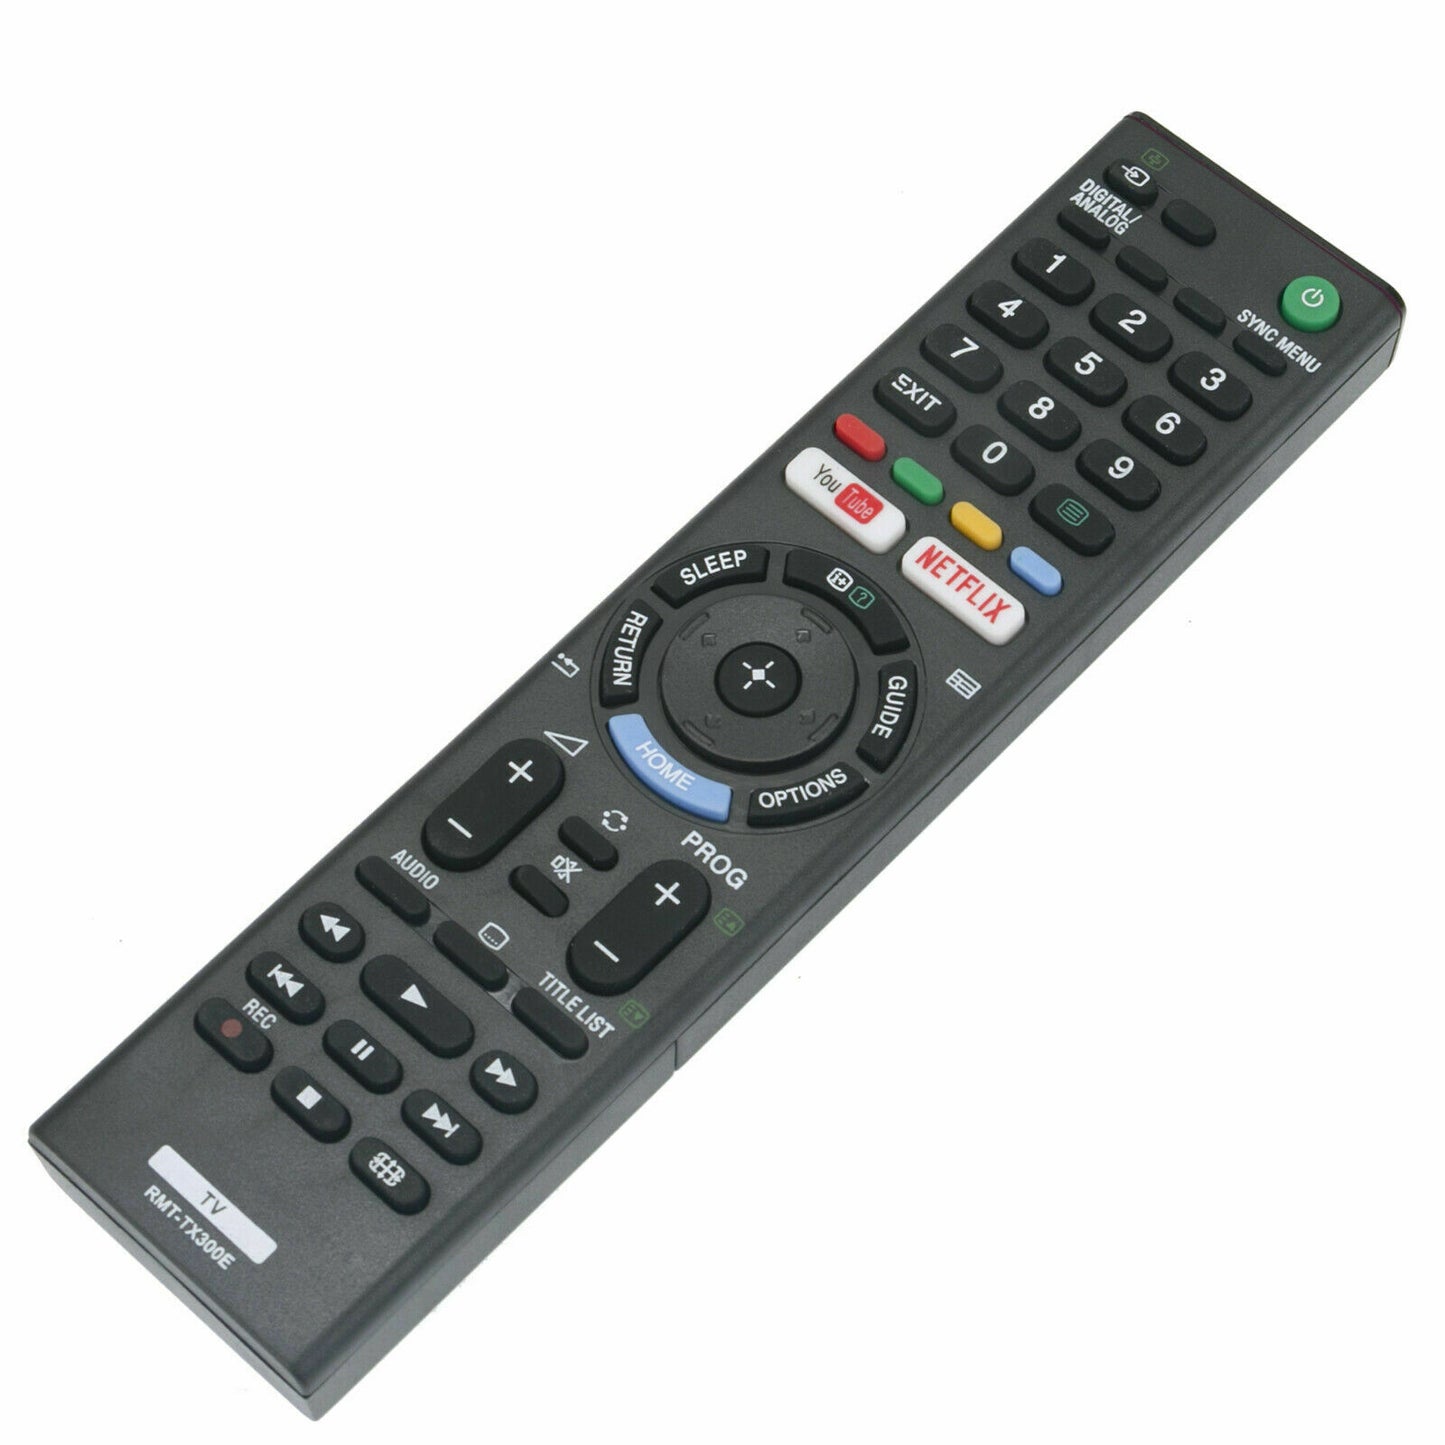 Replacement Remote Control for SONY BRAVIA TV Model KDL-40WE663 /KDL40WE663